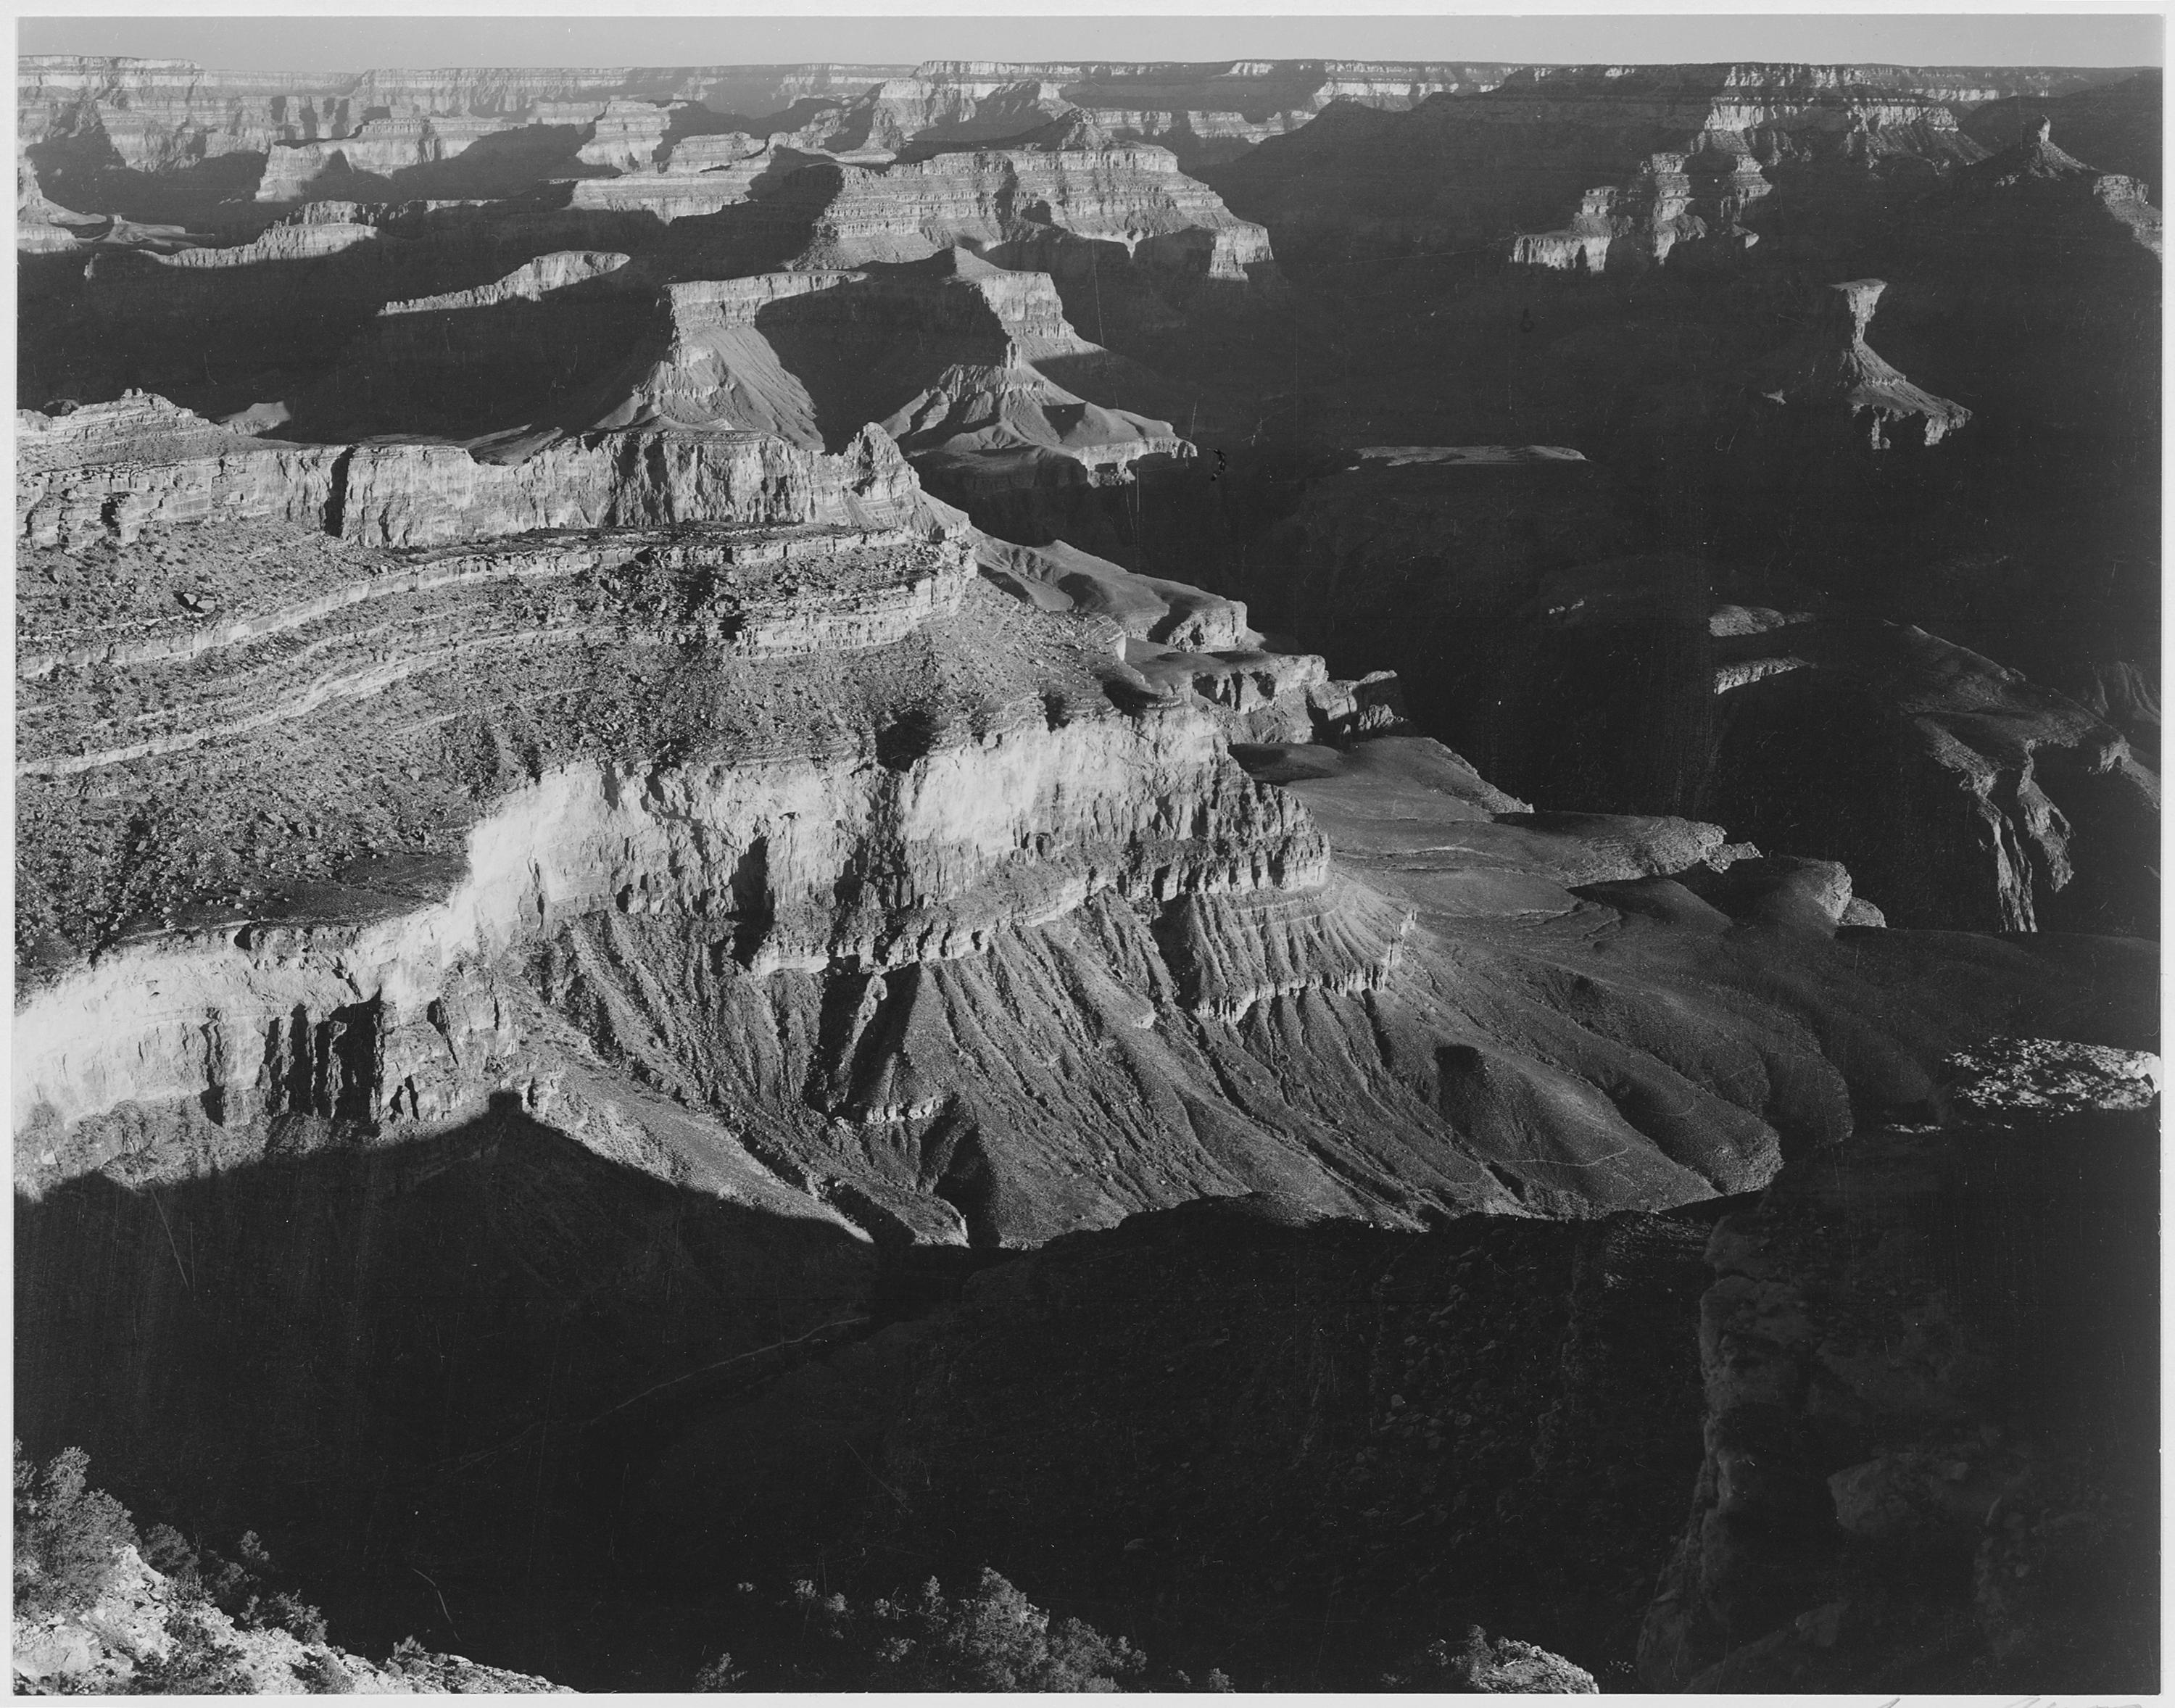 Ansel Adams - National Archives 79-AA-F21